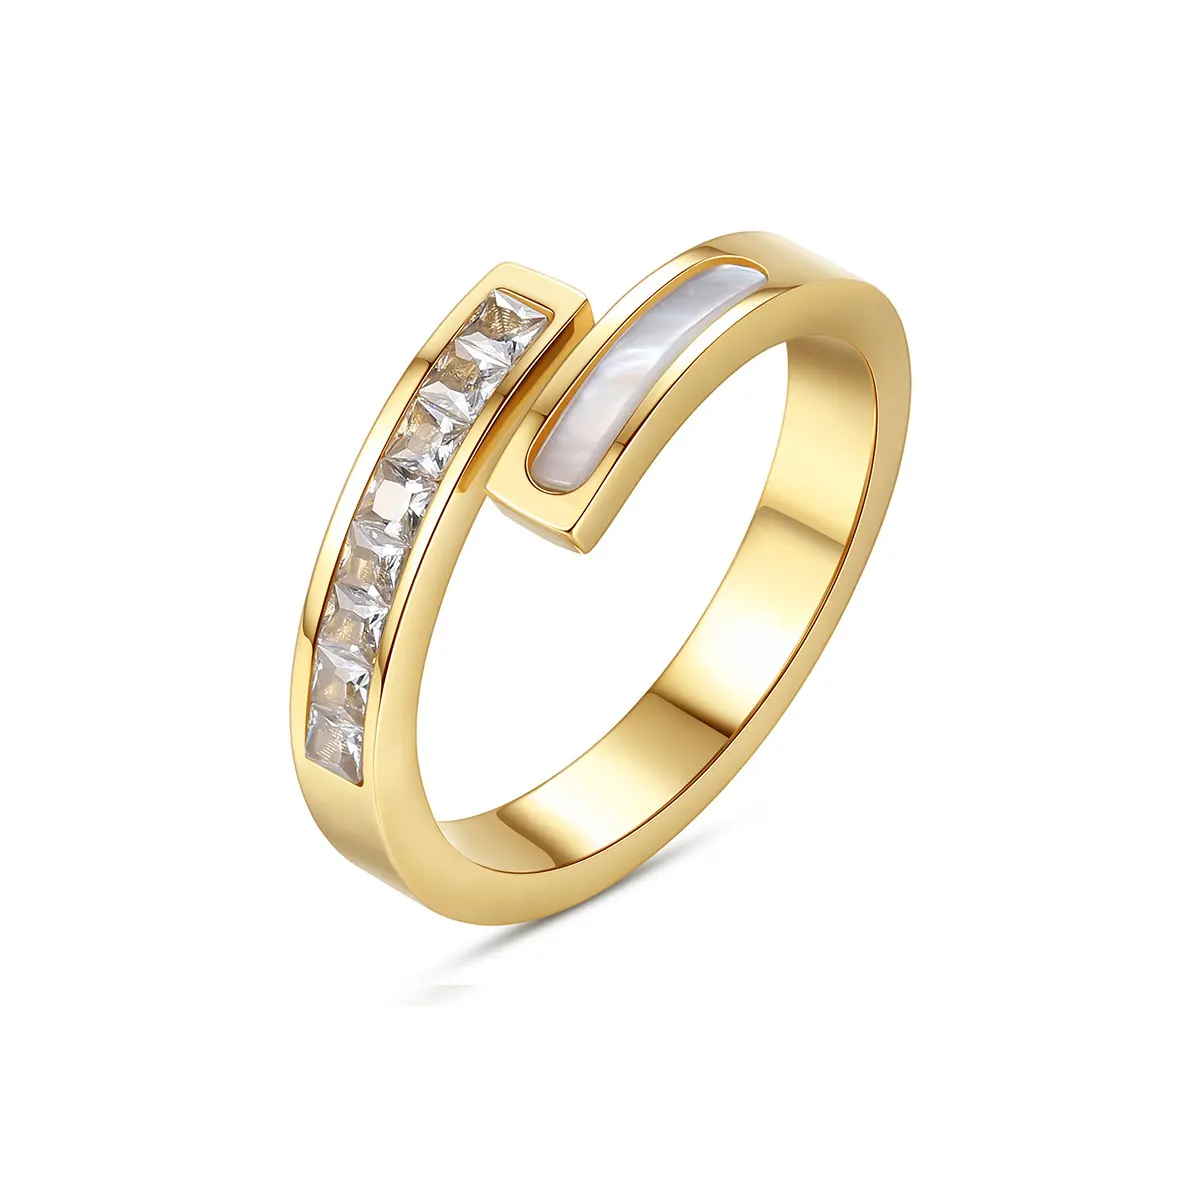 Zircon Shell Rings Stainless Steel Gold Plated High Quality Fashion Luxurious Rings Personalized For Ladies